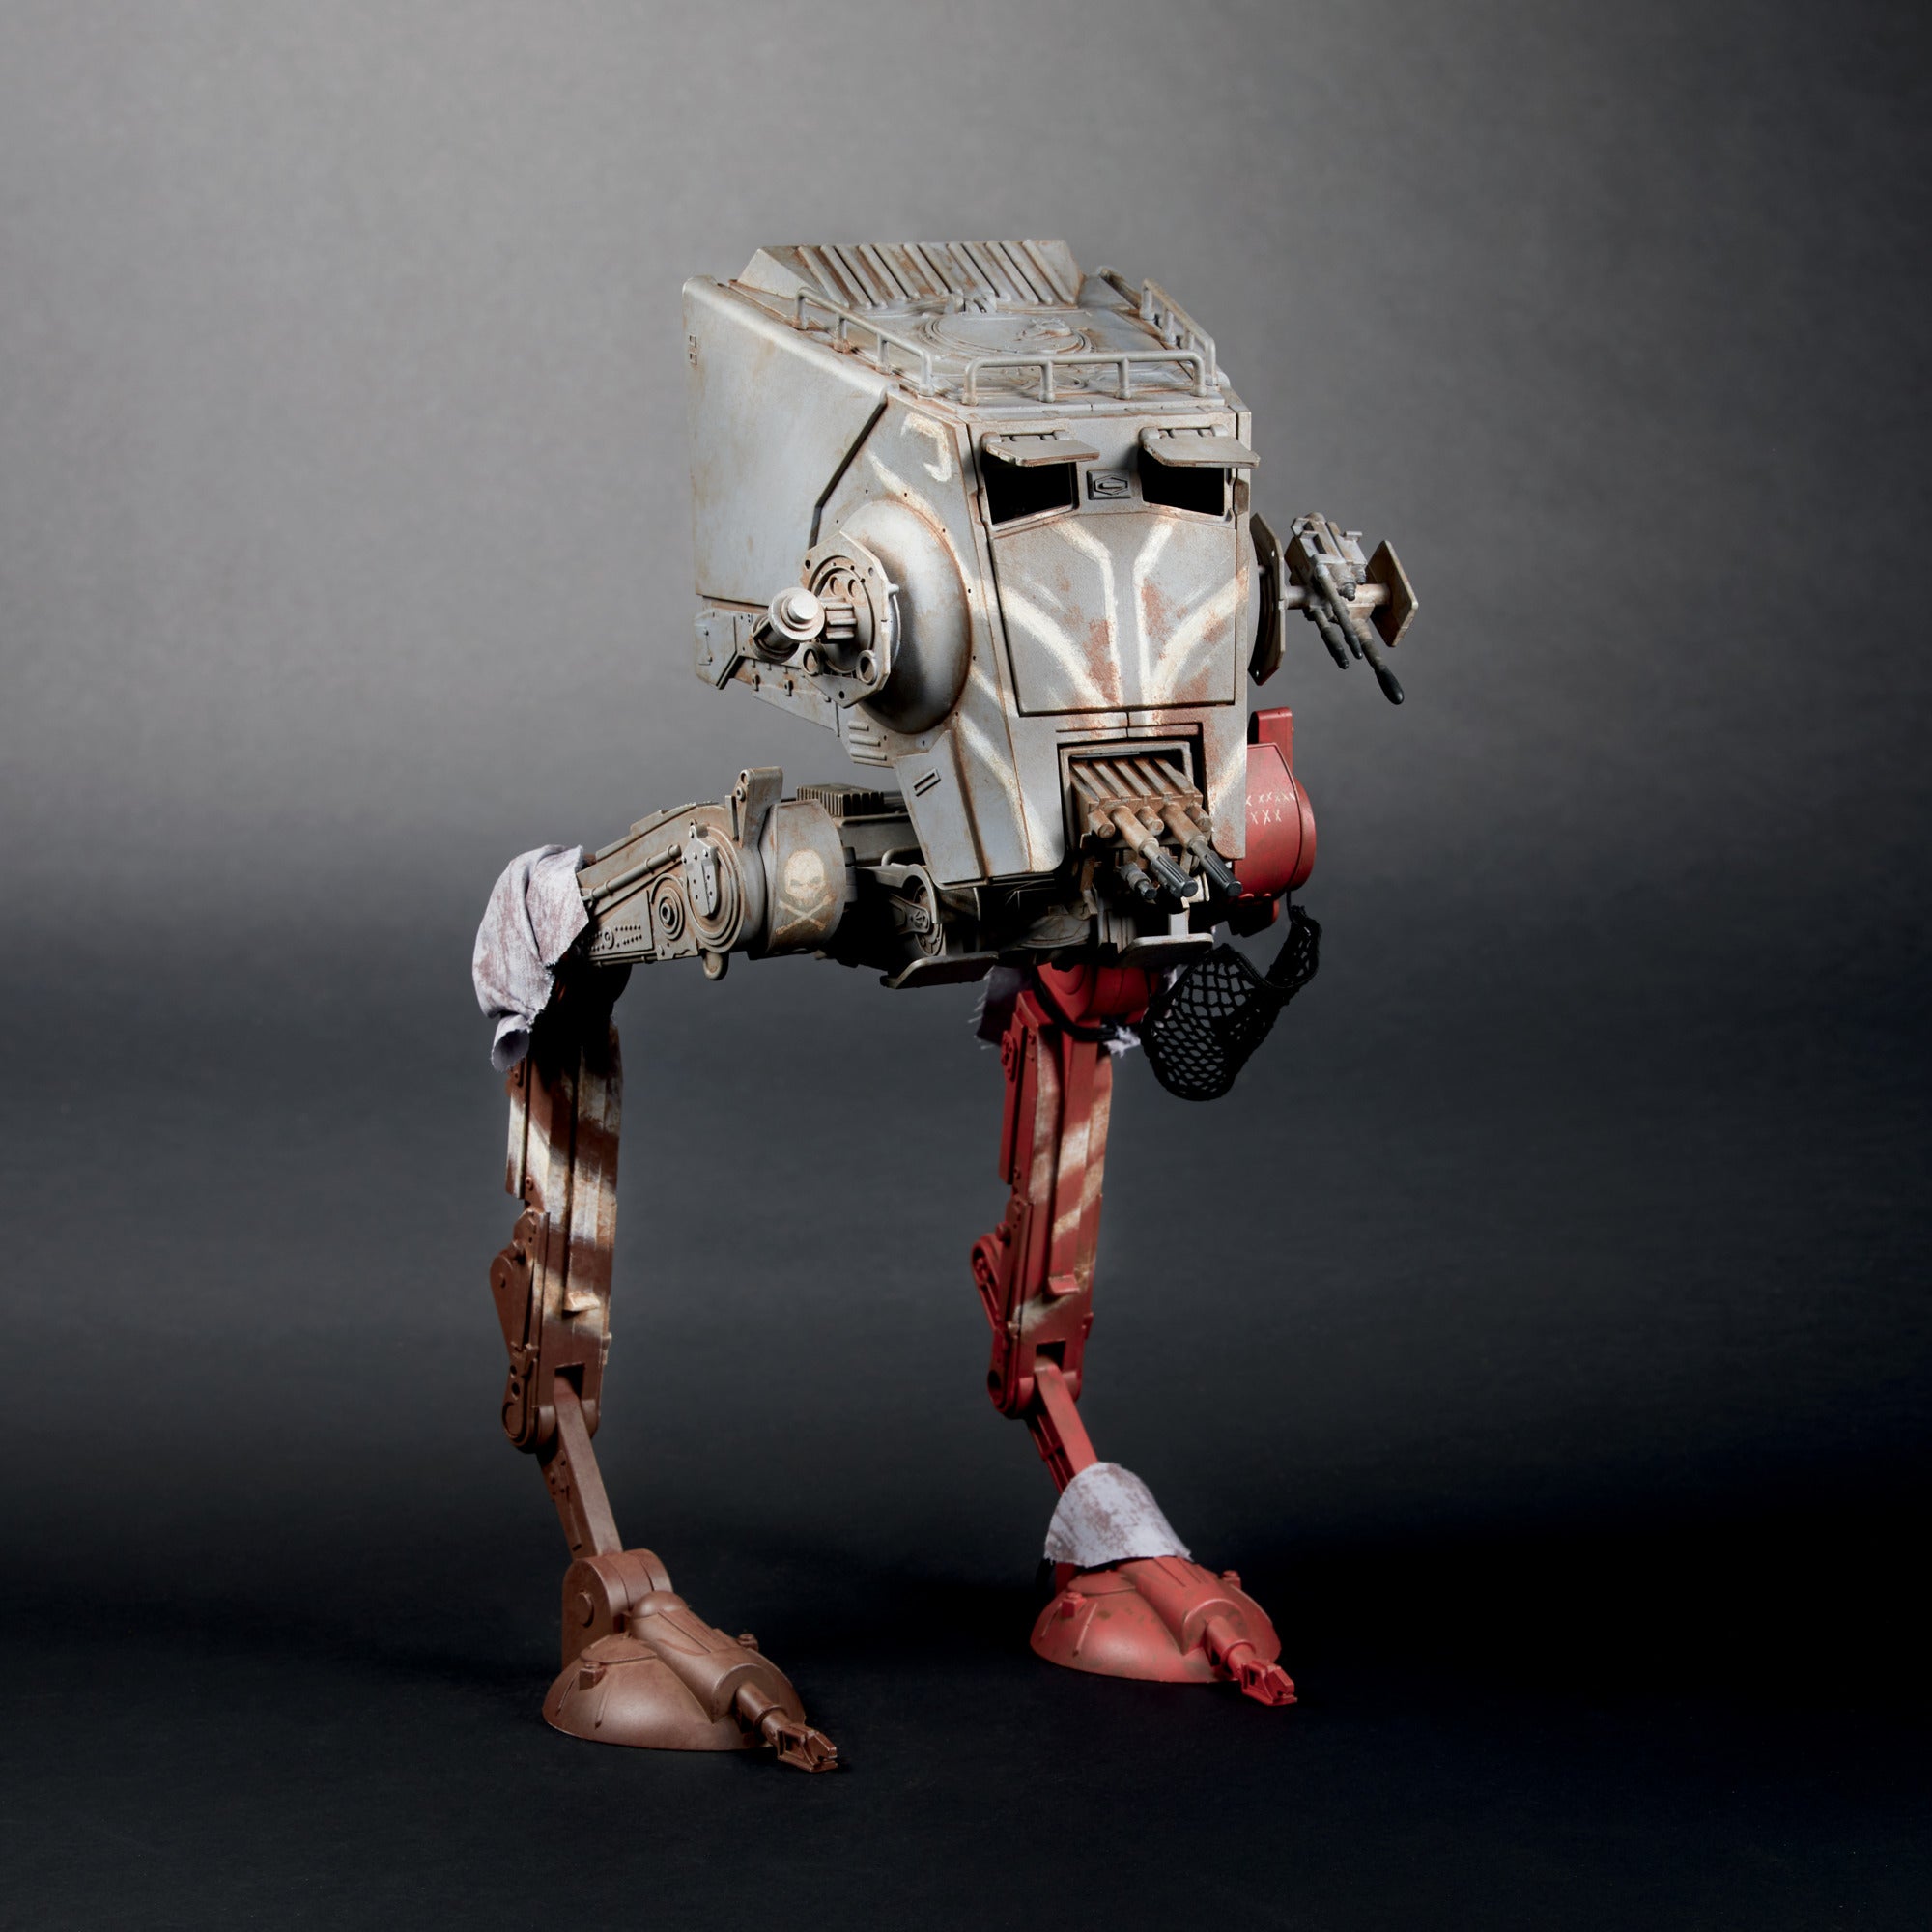 Star Wars The Vintage Collection The Mandalorian AT-ST Raider